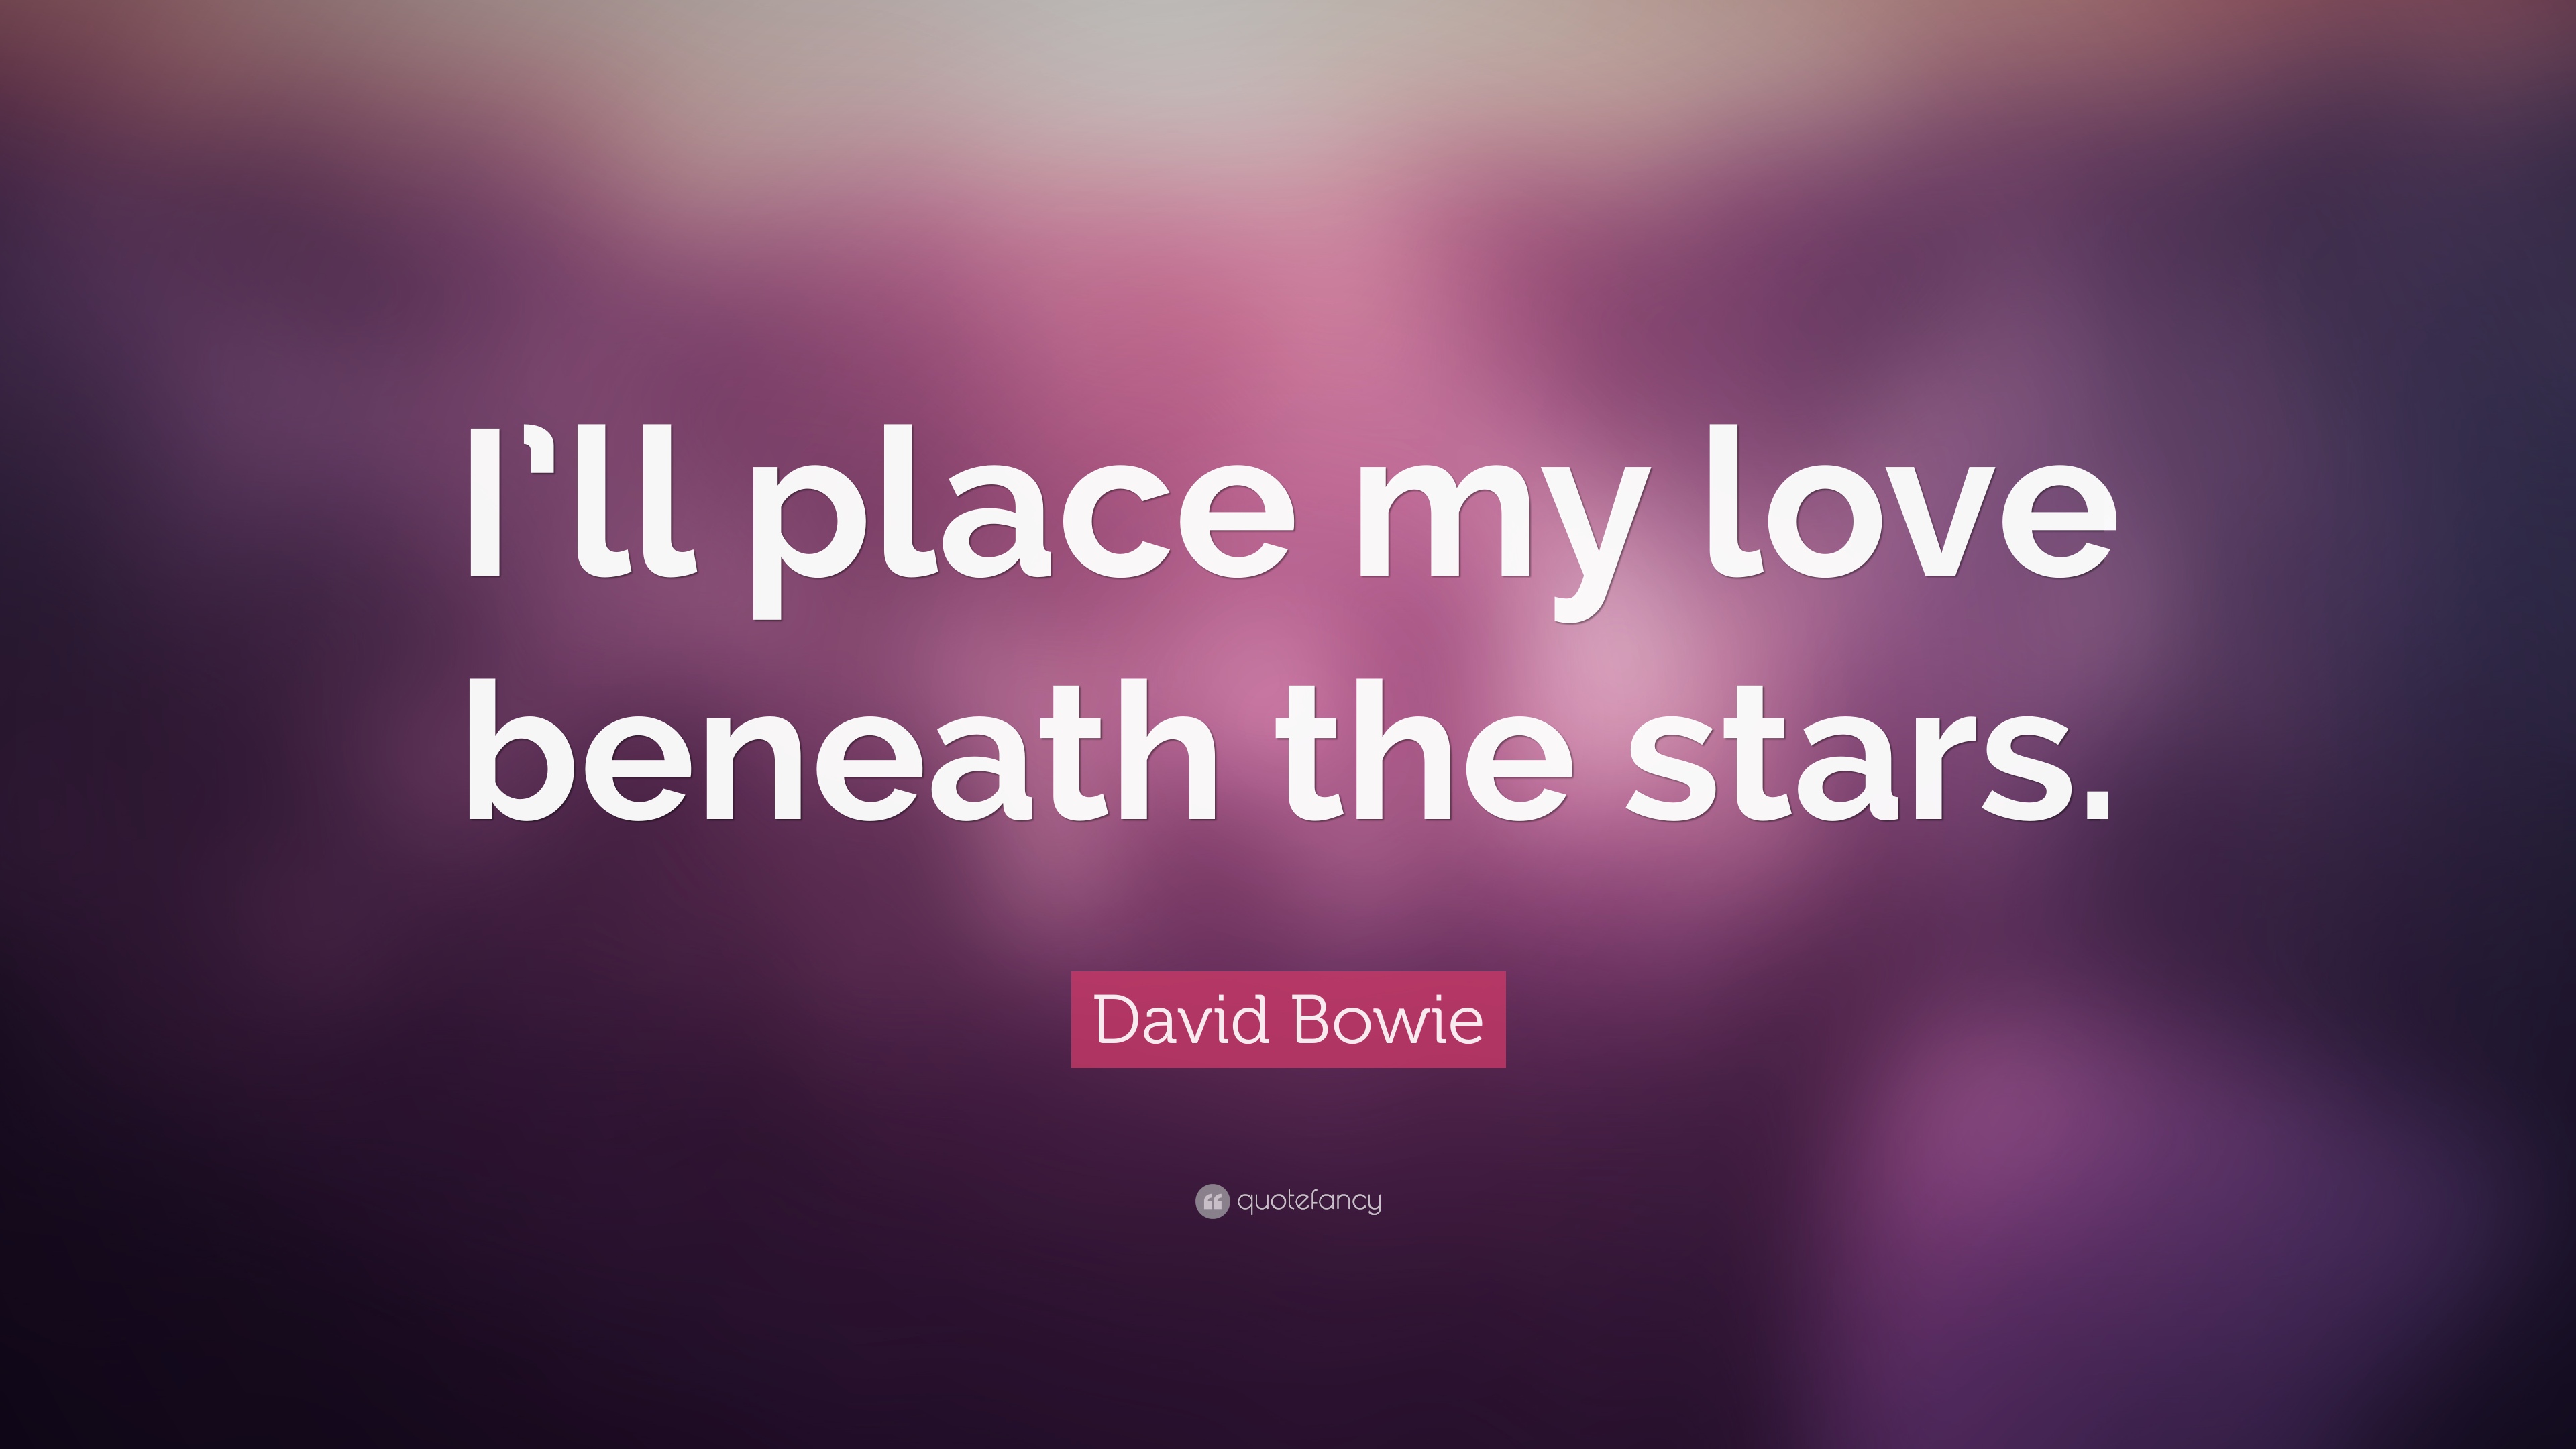 5 David Bowie Quotes About Love